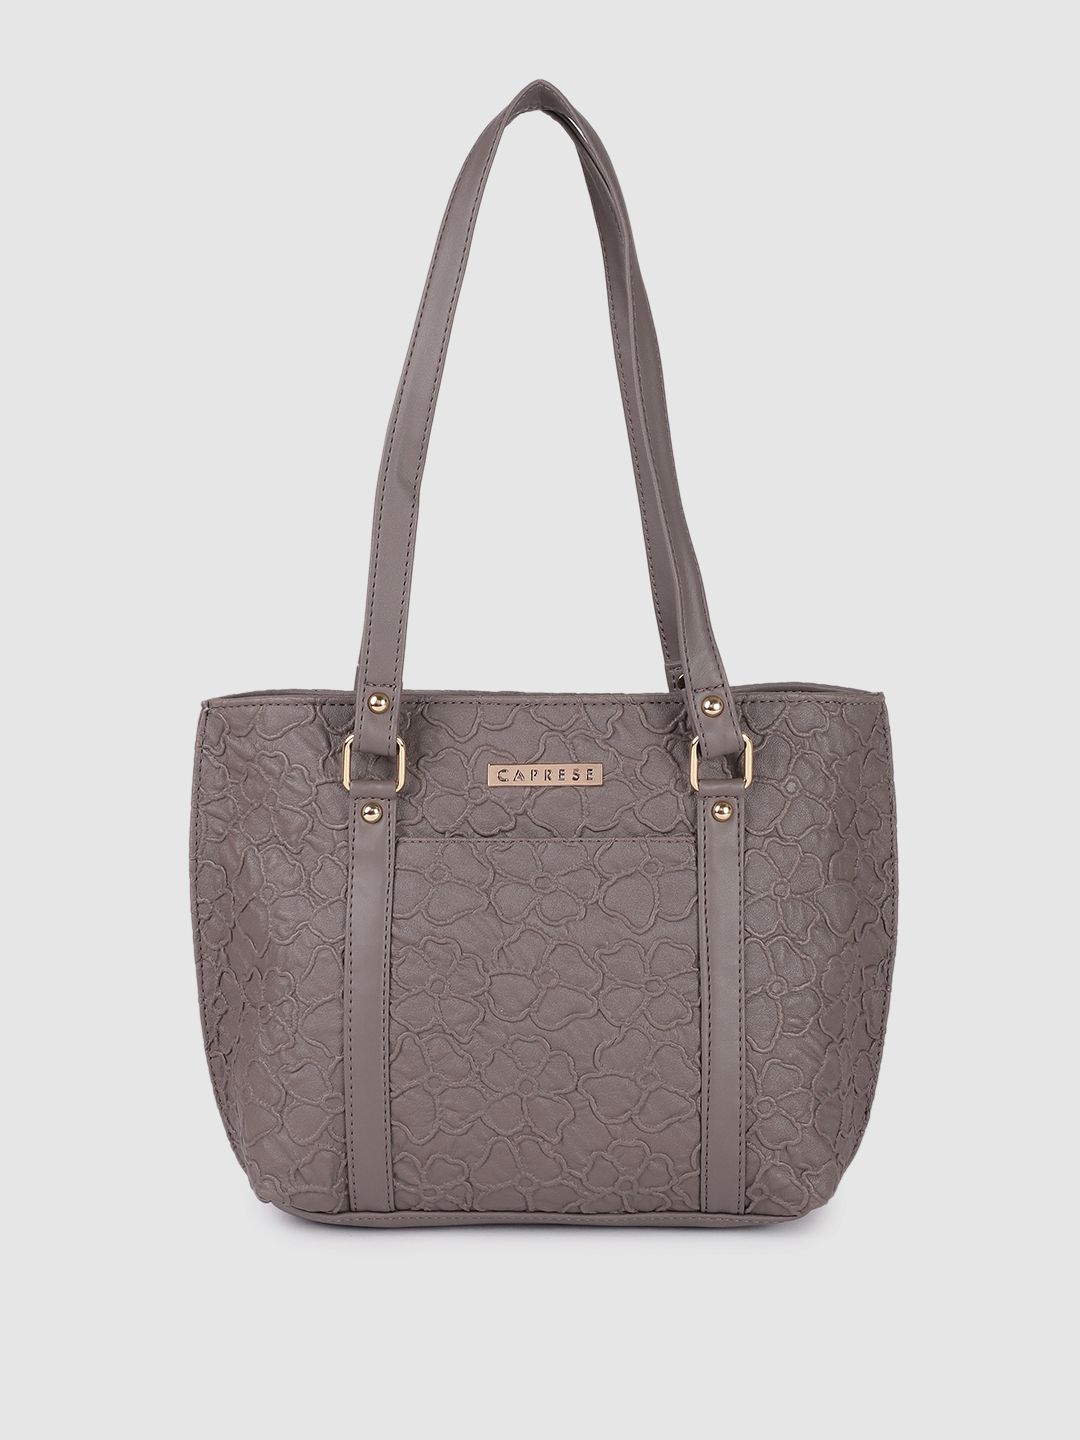 Caprese Grey Floral Leather Structured Shoulder Bag Price in India